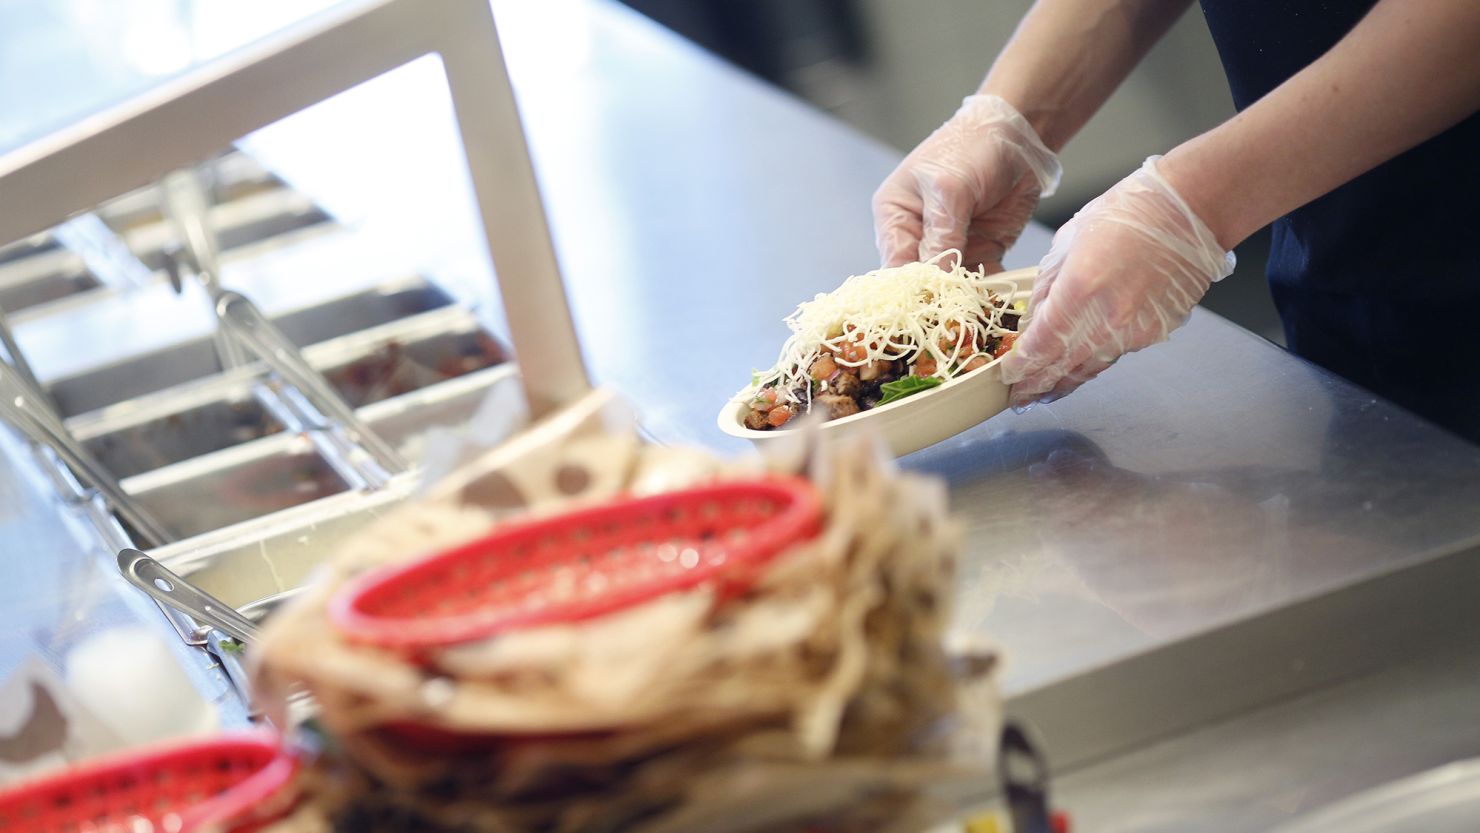 A customer who threw a burrito bowl in a Chipotle worker's face in September has been sentenced to work in the fast food industry for two months.